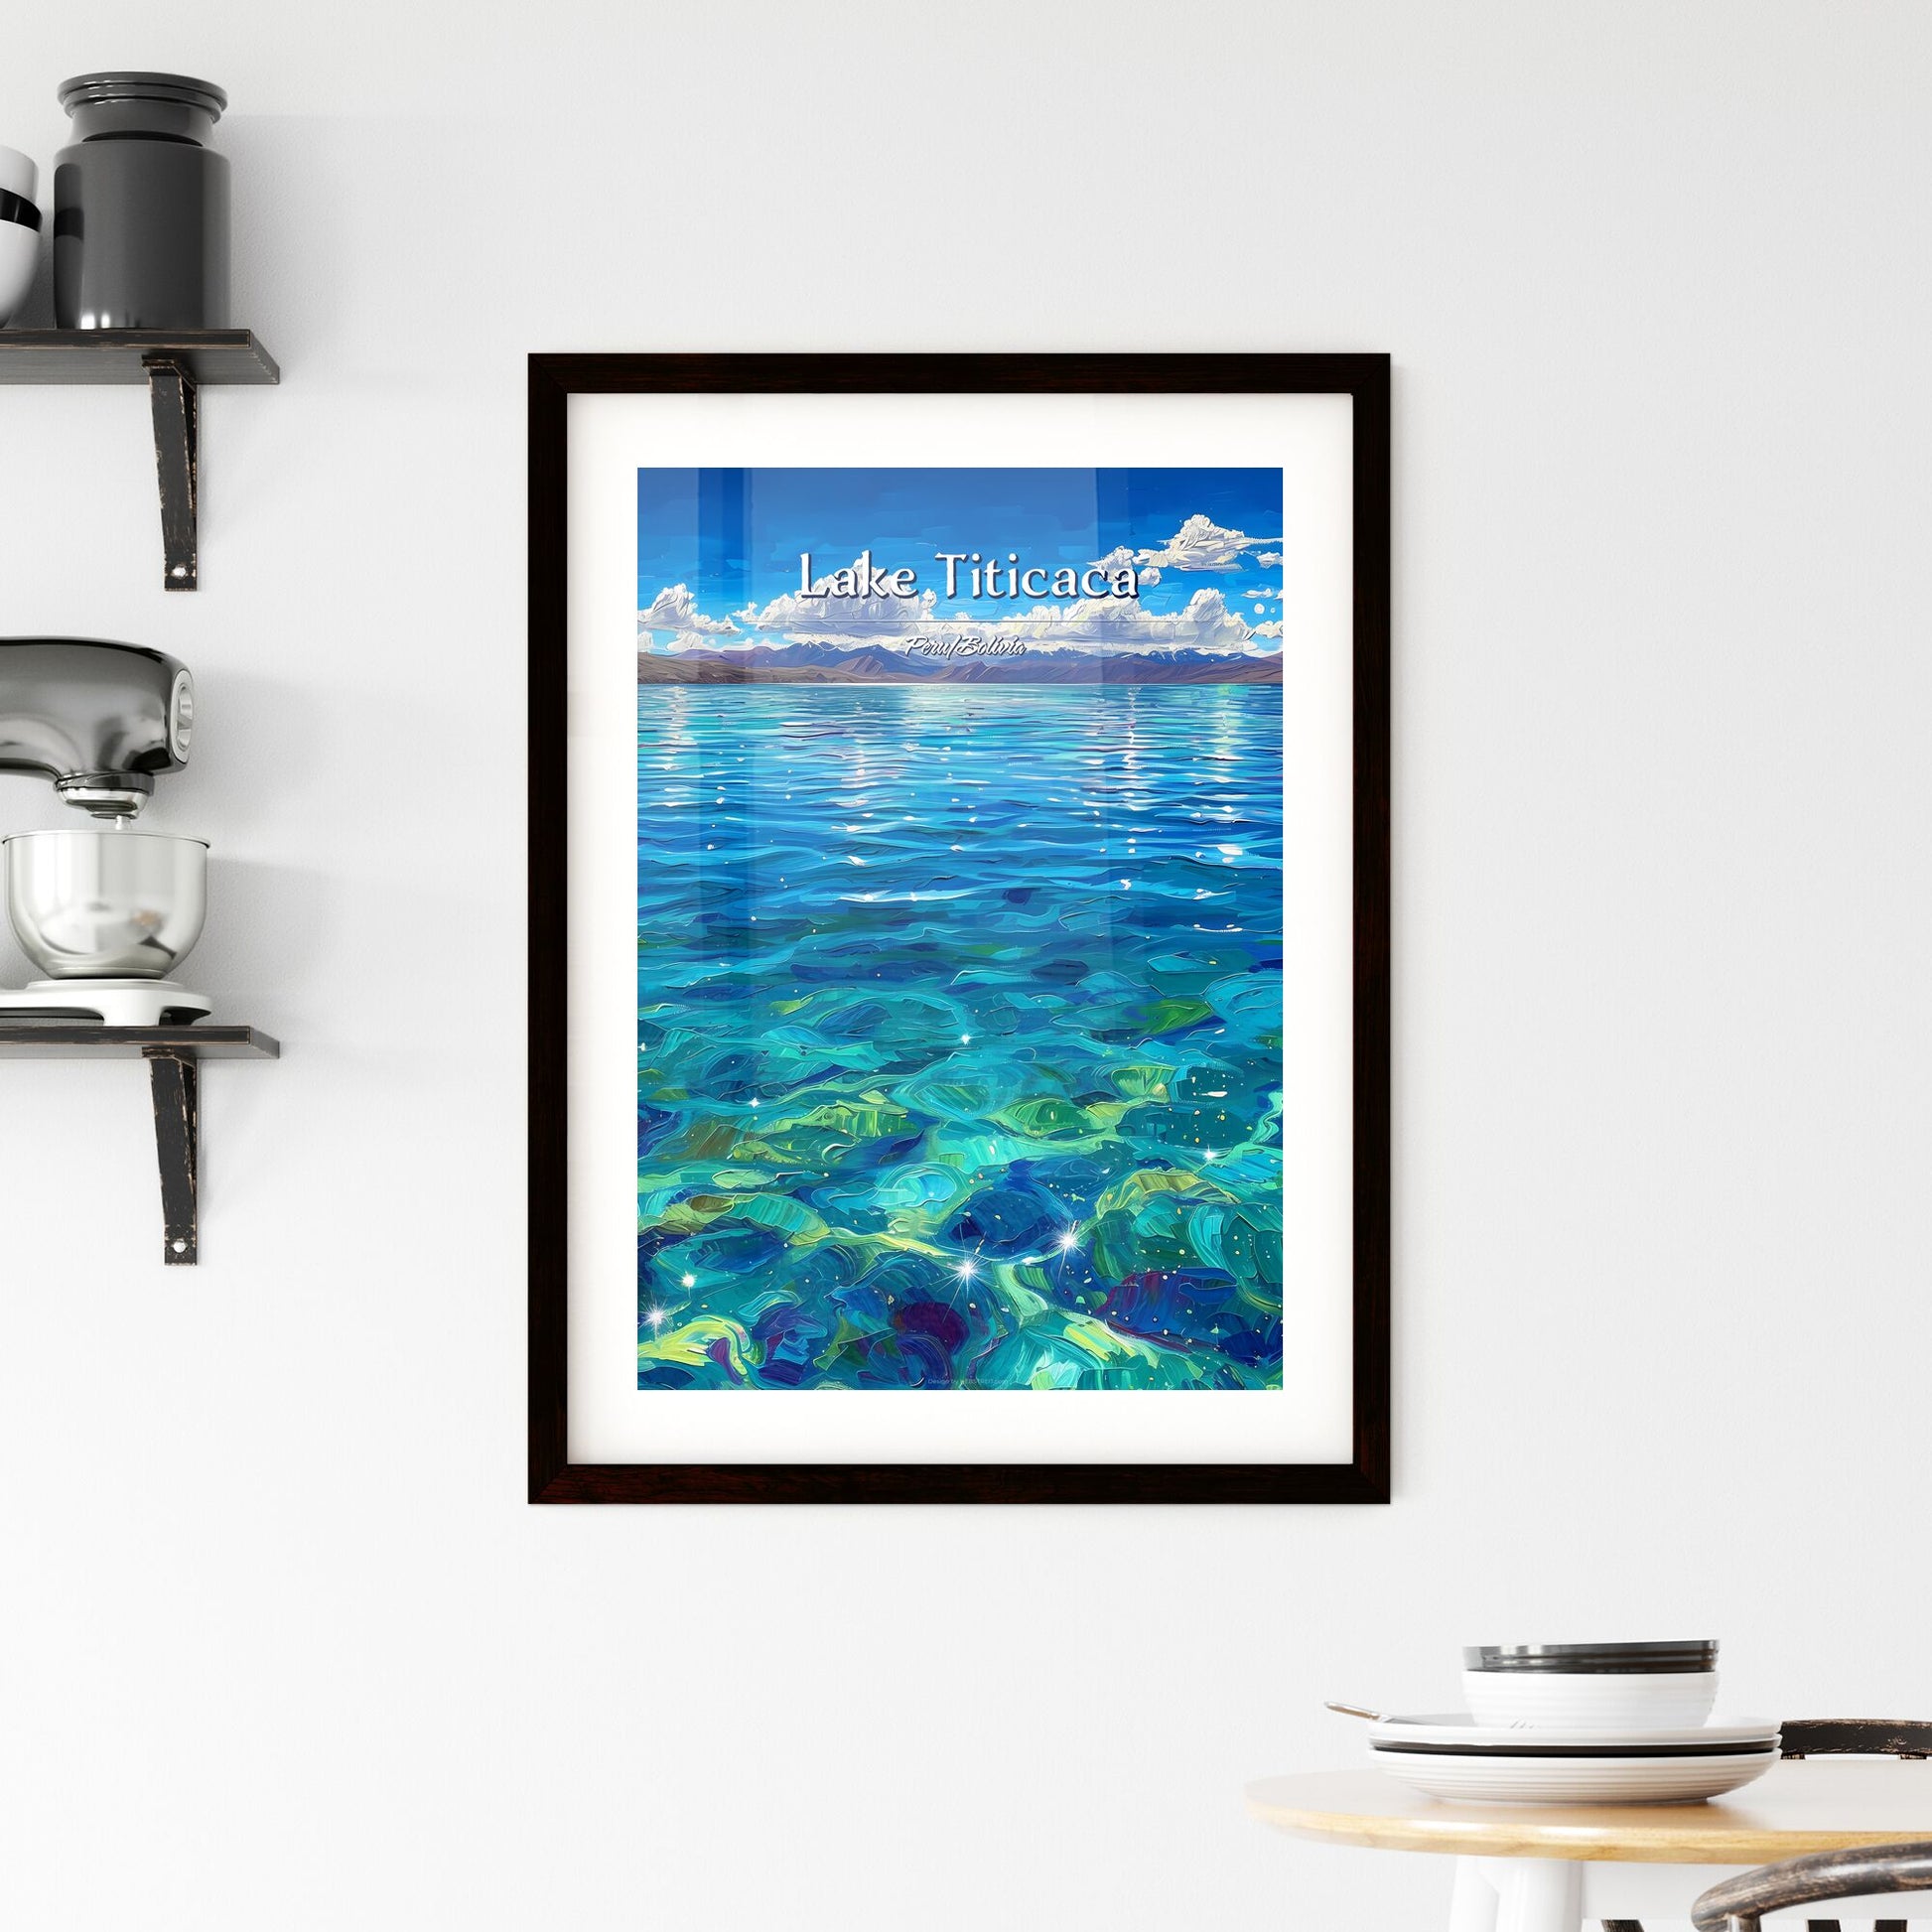 Lake Titicaca, Peru/Bolivia - Art print of a blue water with mountains and clouds in the sky Default Title